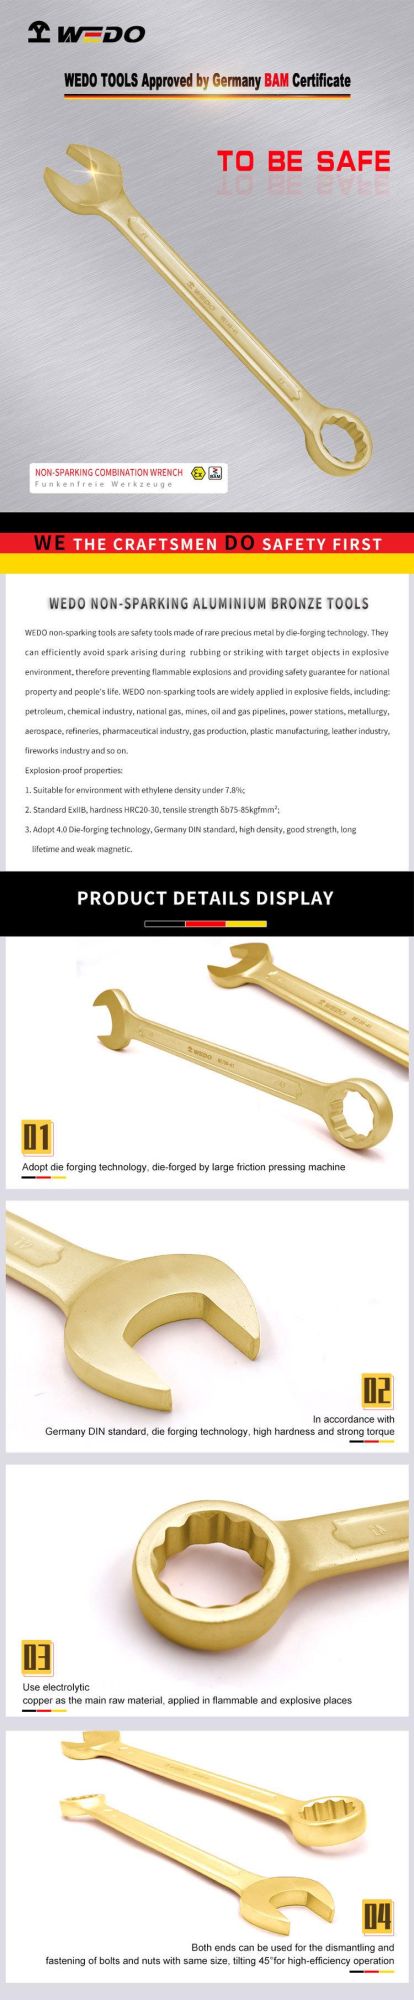 WEDO Hot Sale Wrench Aluminium Bronze Non-Sparking Combination Spanner Metric & Imperial